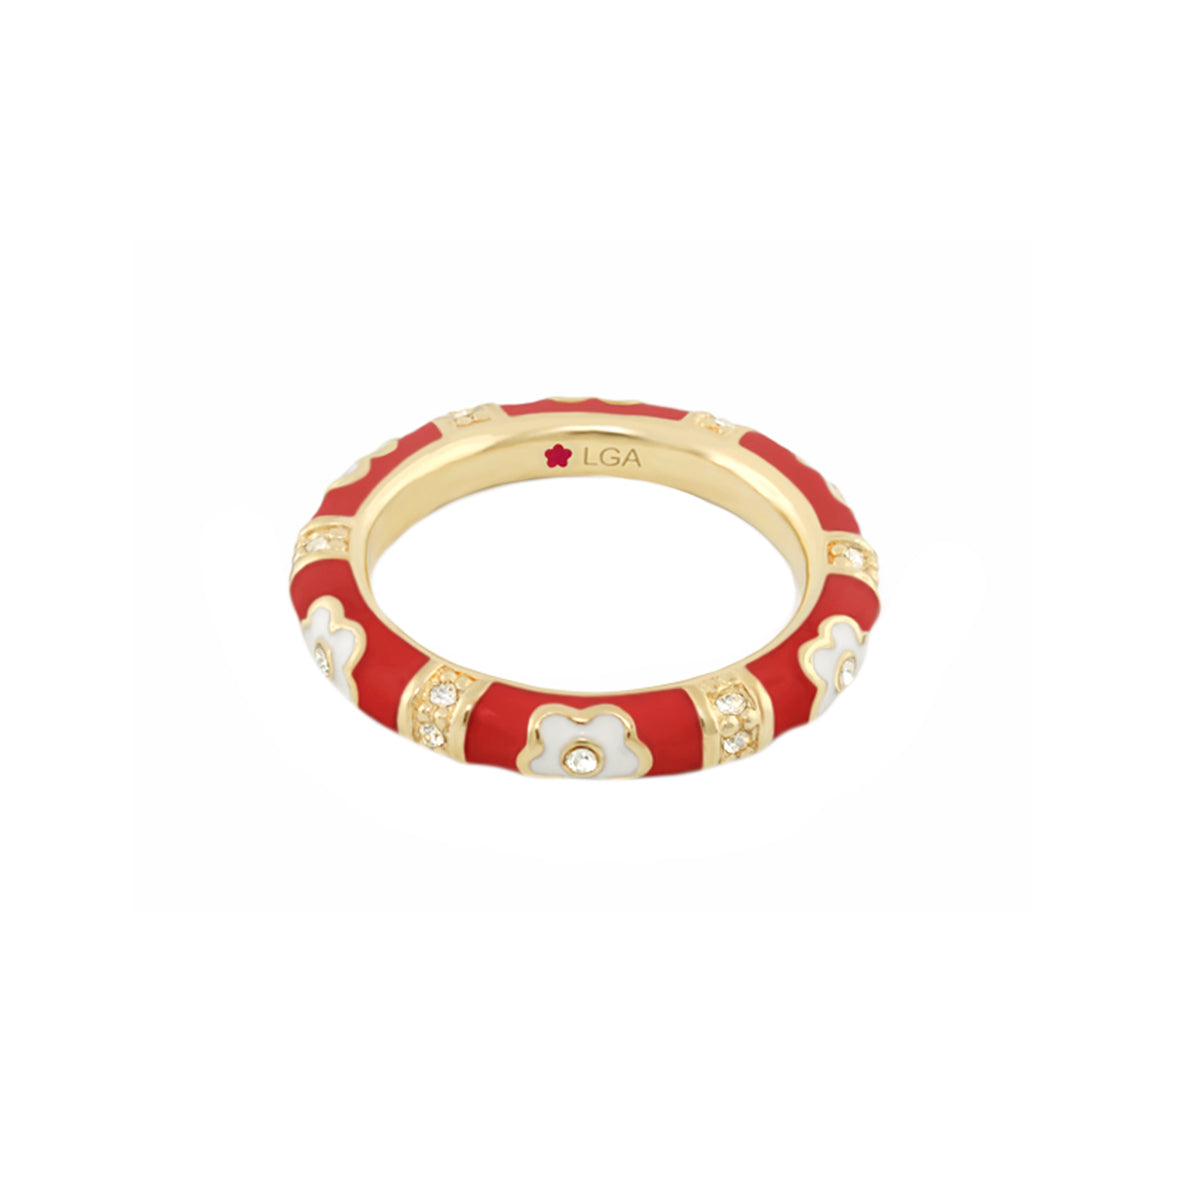 Daisy Love  Stackable Ring